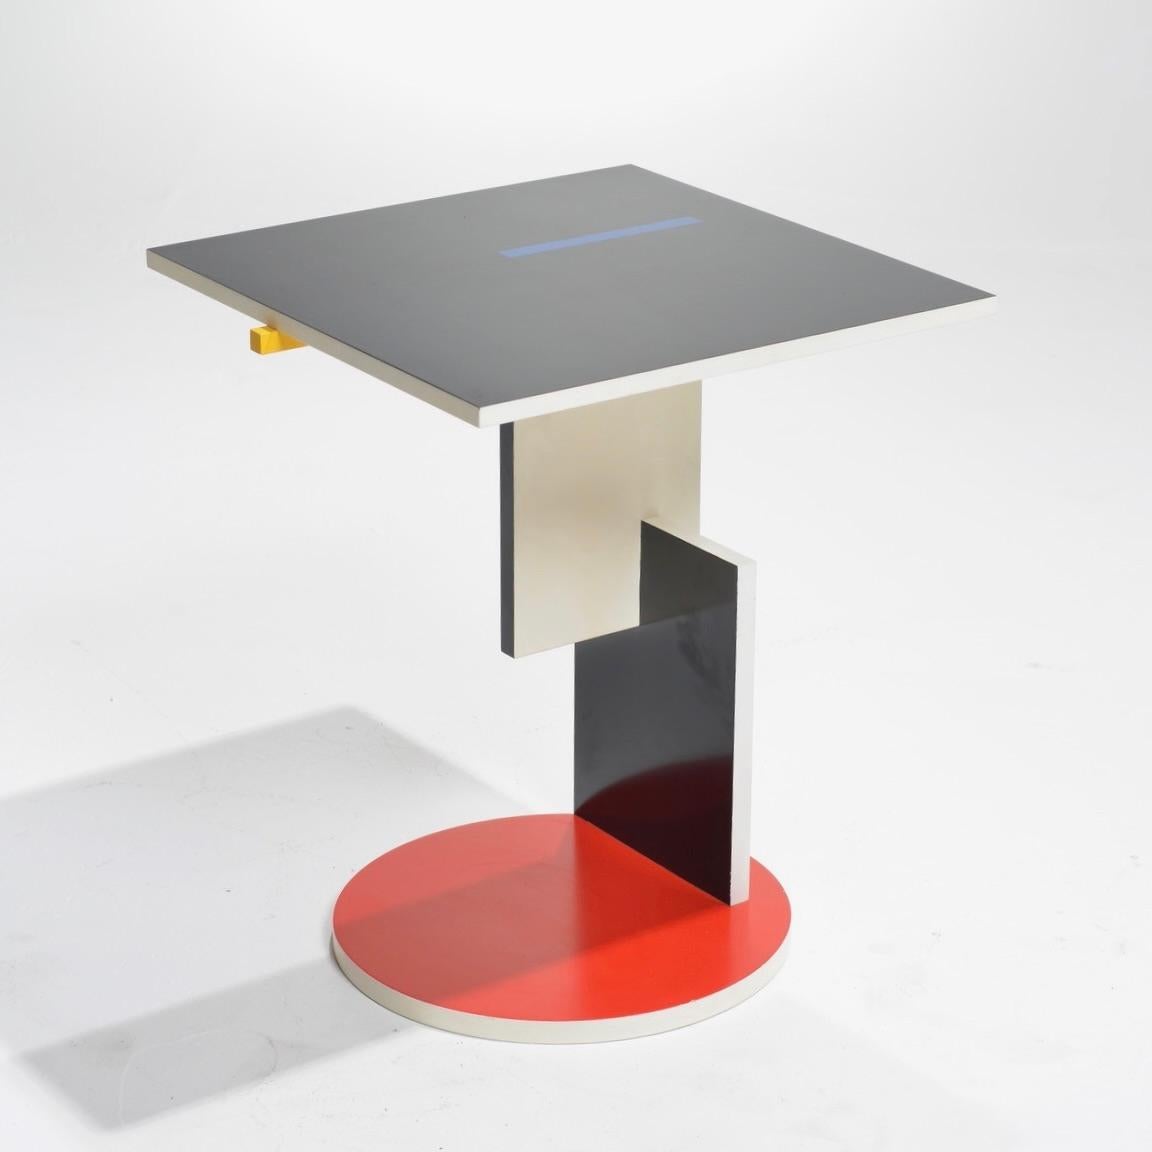 An amazing end table by the dutch Modernist Gerrit Rietveld. In great vintage condition.